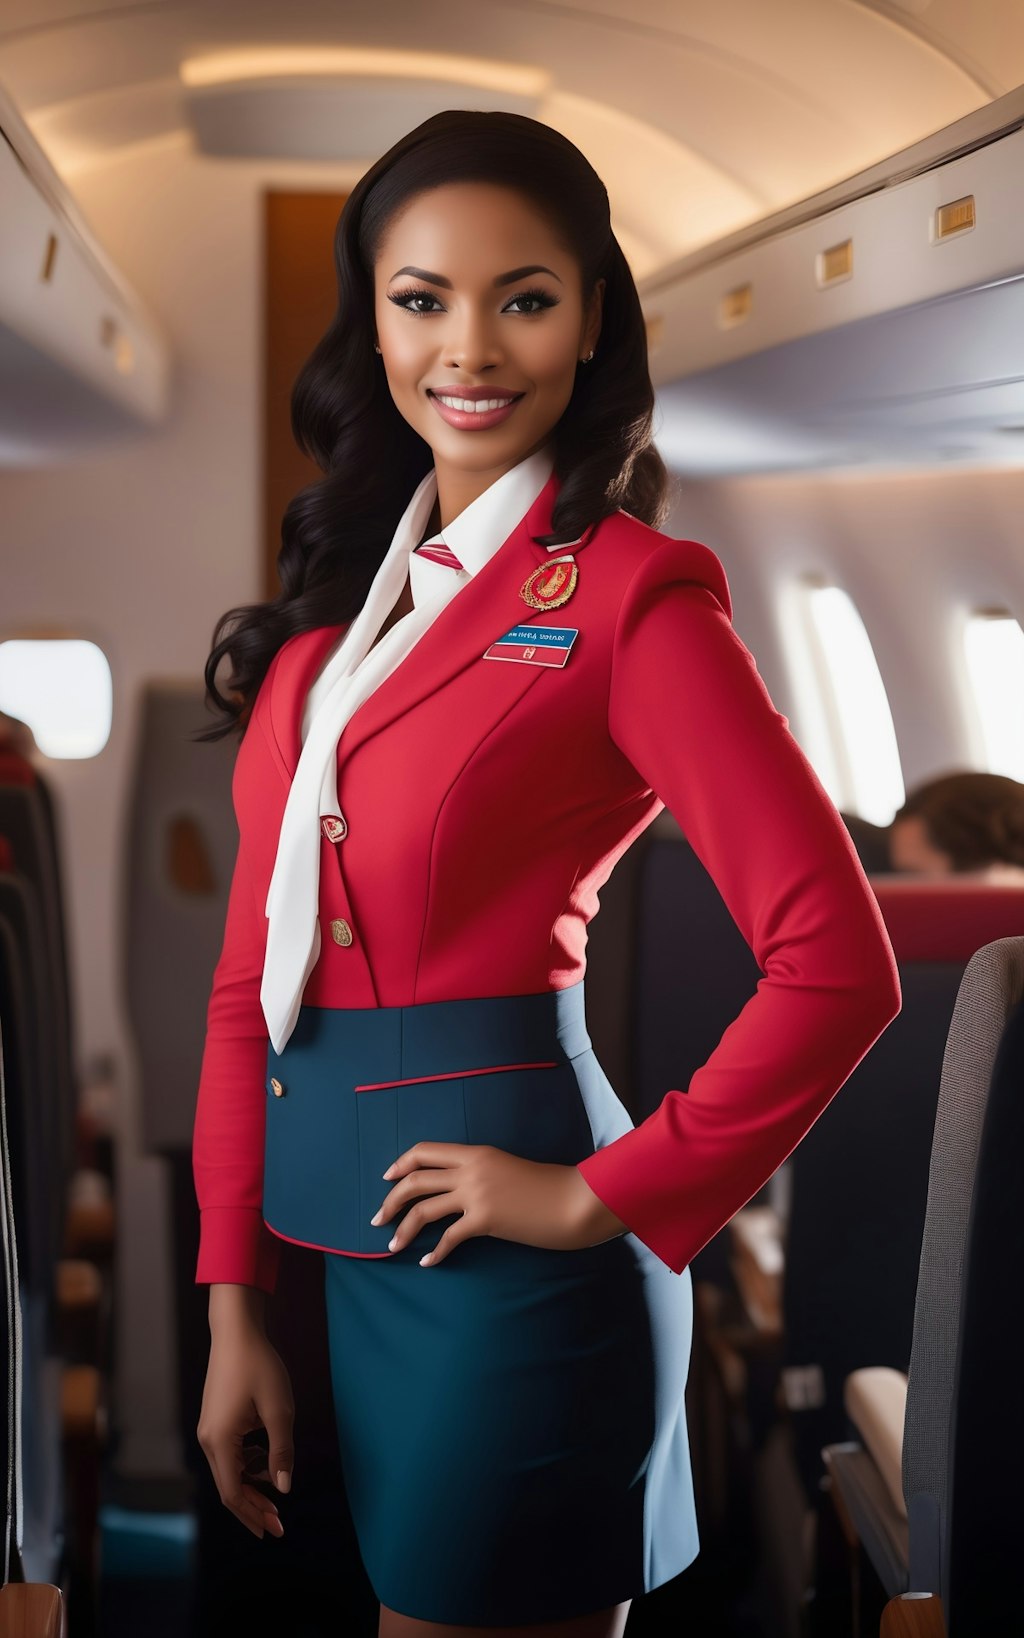 The Skies’ Most Beautiful Stewardess – A Breathtaking Vision of Elegance and Professionalism